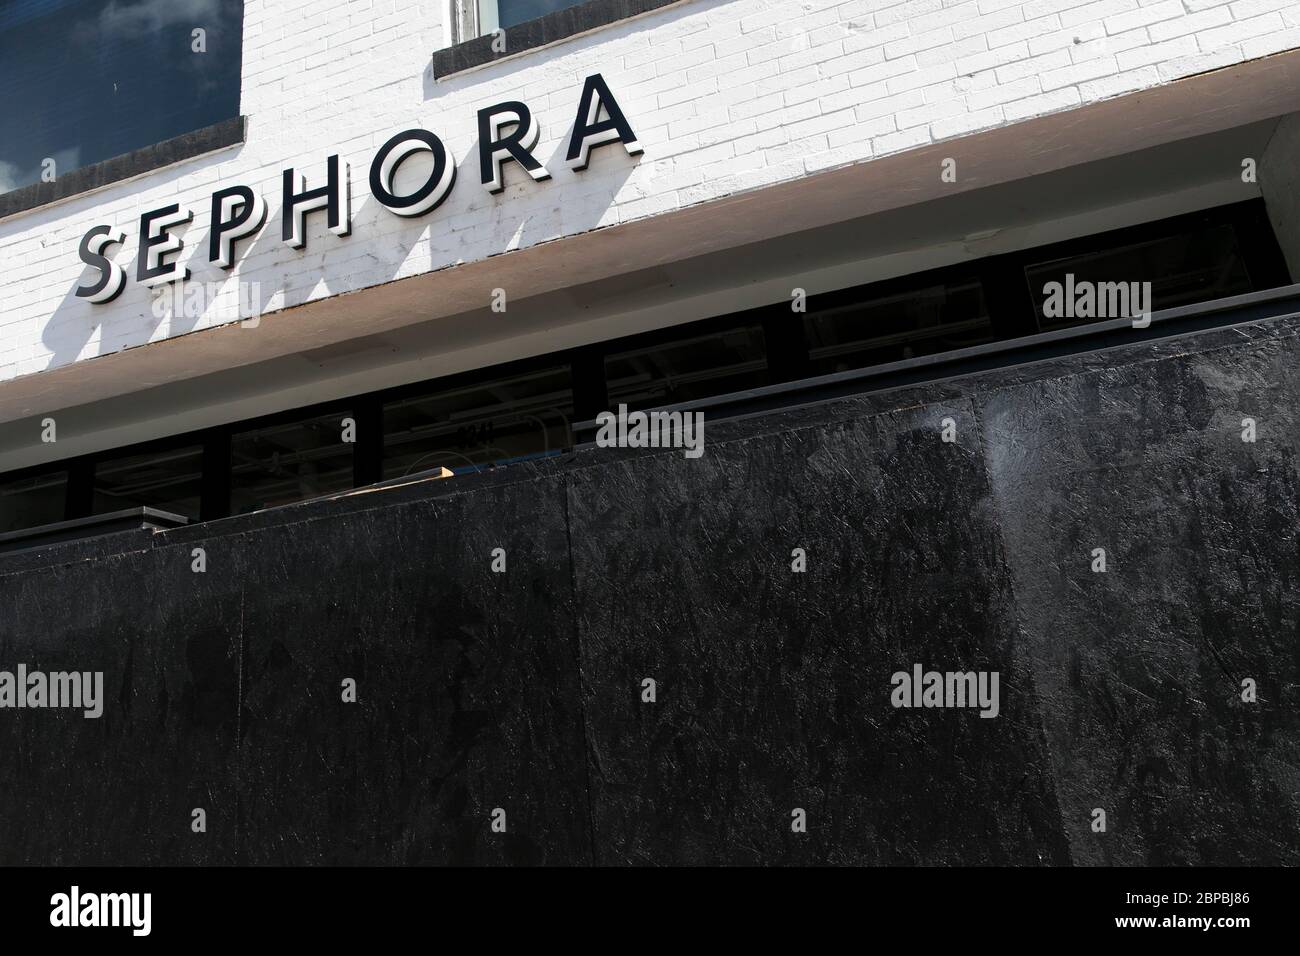 A logo sign outside of a boarded up and closed Sephora retail store location in Washington, D.C., on May 9, 2020. Stock Photo